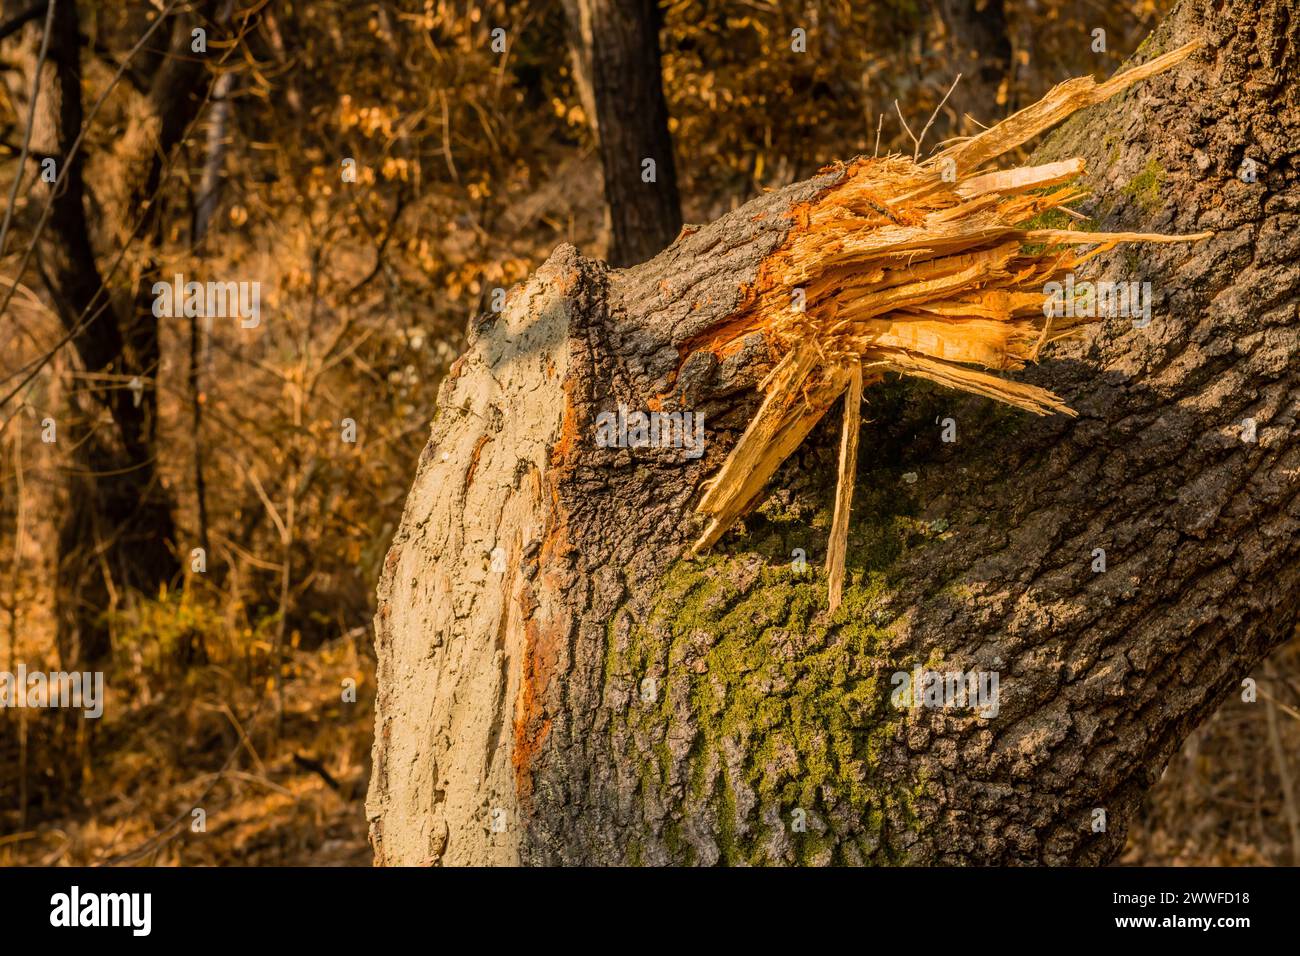 Splintered wood of a broken tree limb with moss showing signs of natural damage, in South Korea Stock Photo